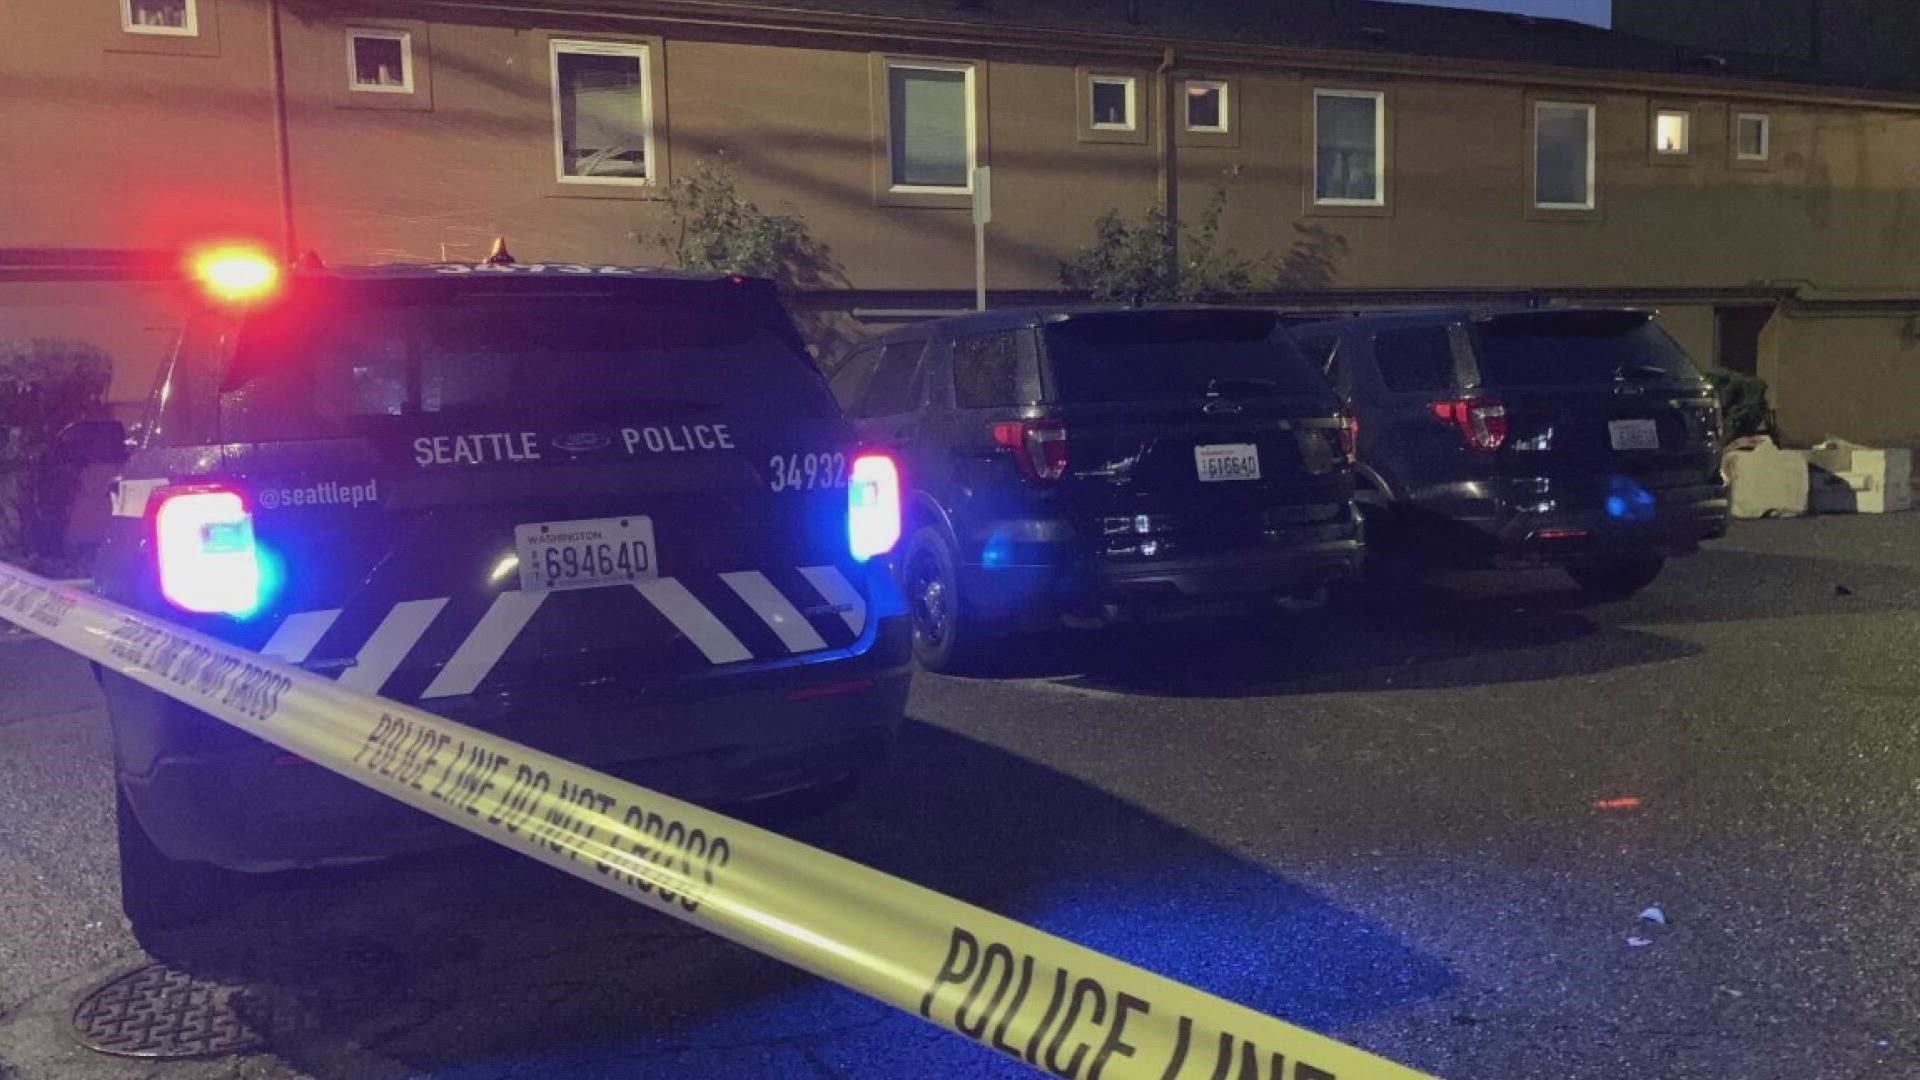 A 55-year-old woman and 53-year-old man were killed in Seattle's Georgetown neighborhood Sunday afternoon. A 42-year-old man has been arrested.